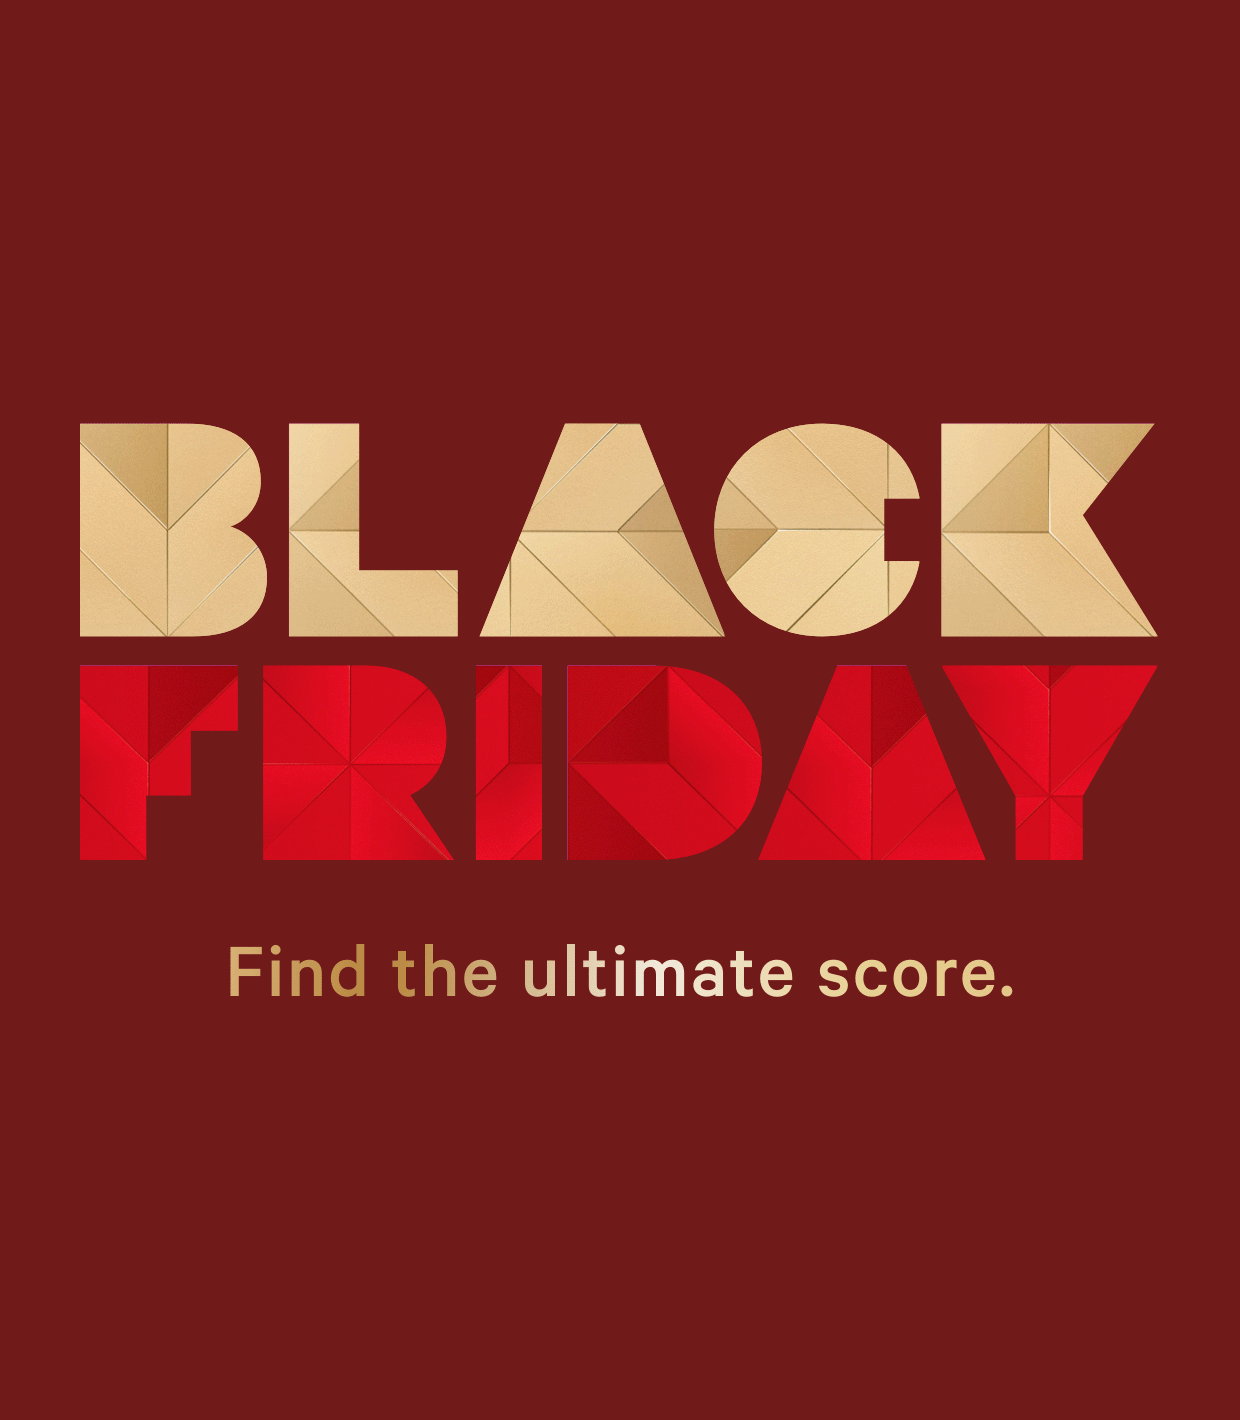 BLACK FRIDAY. Find the ultimate score.